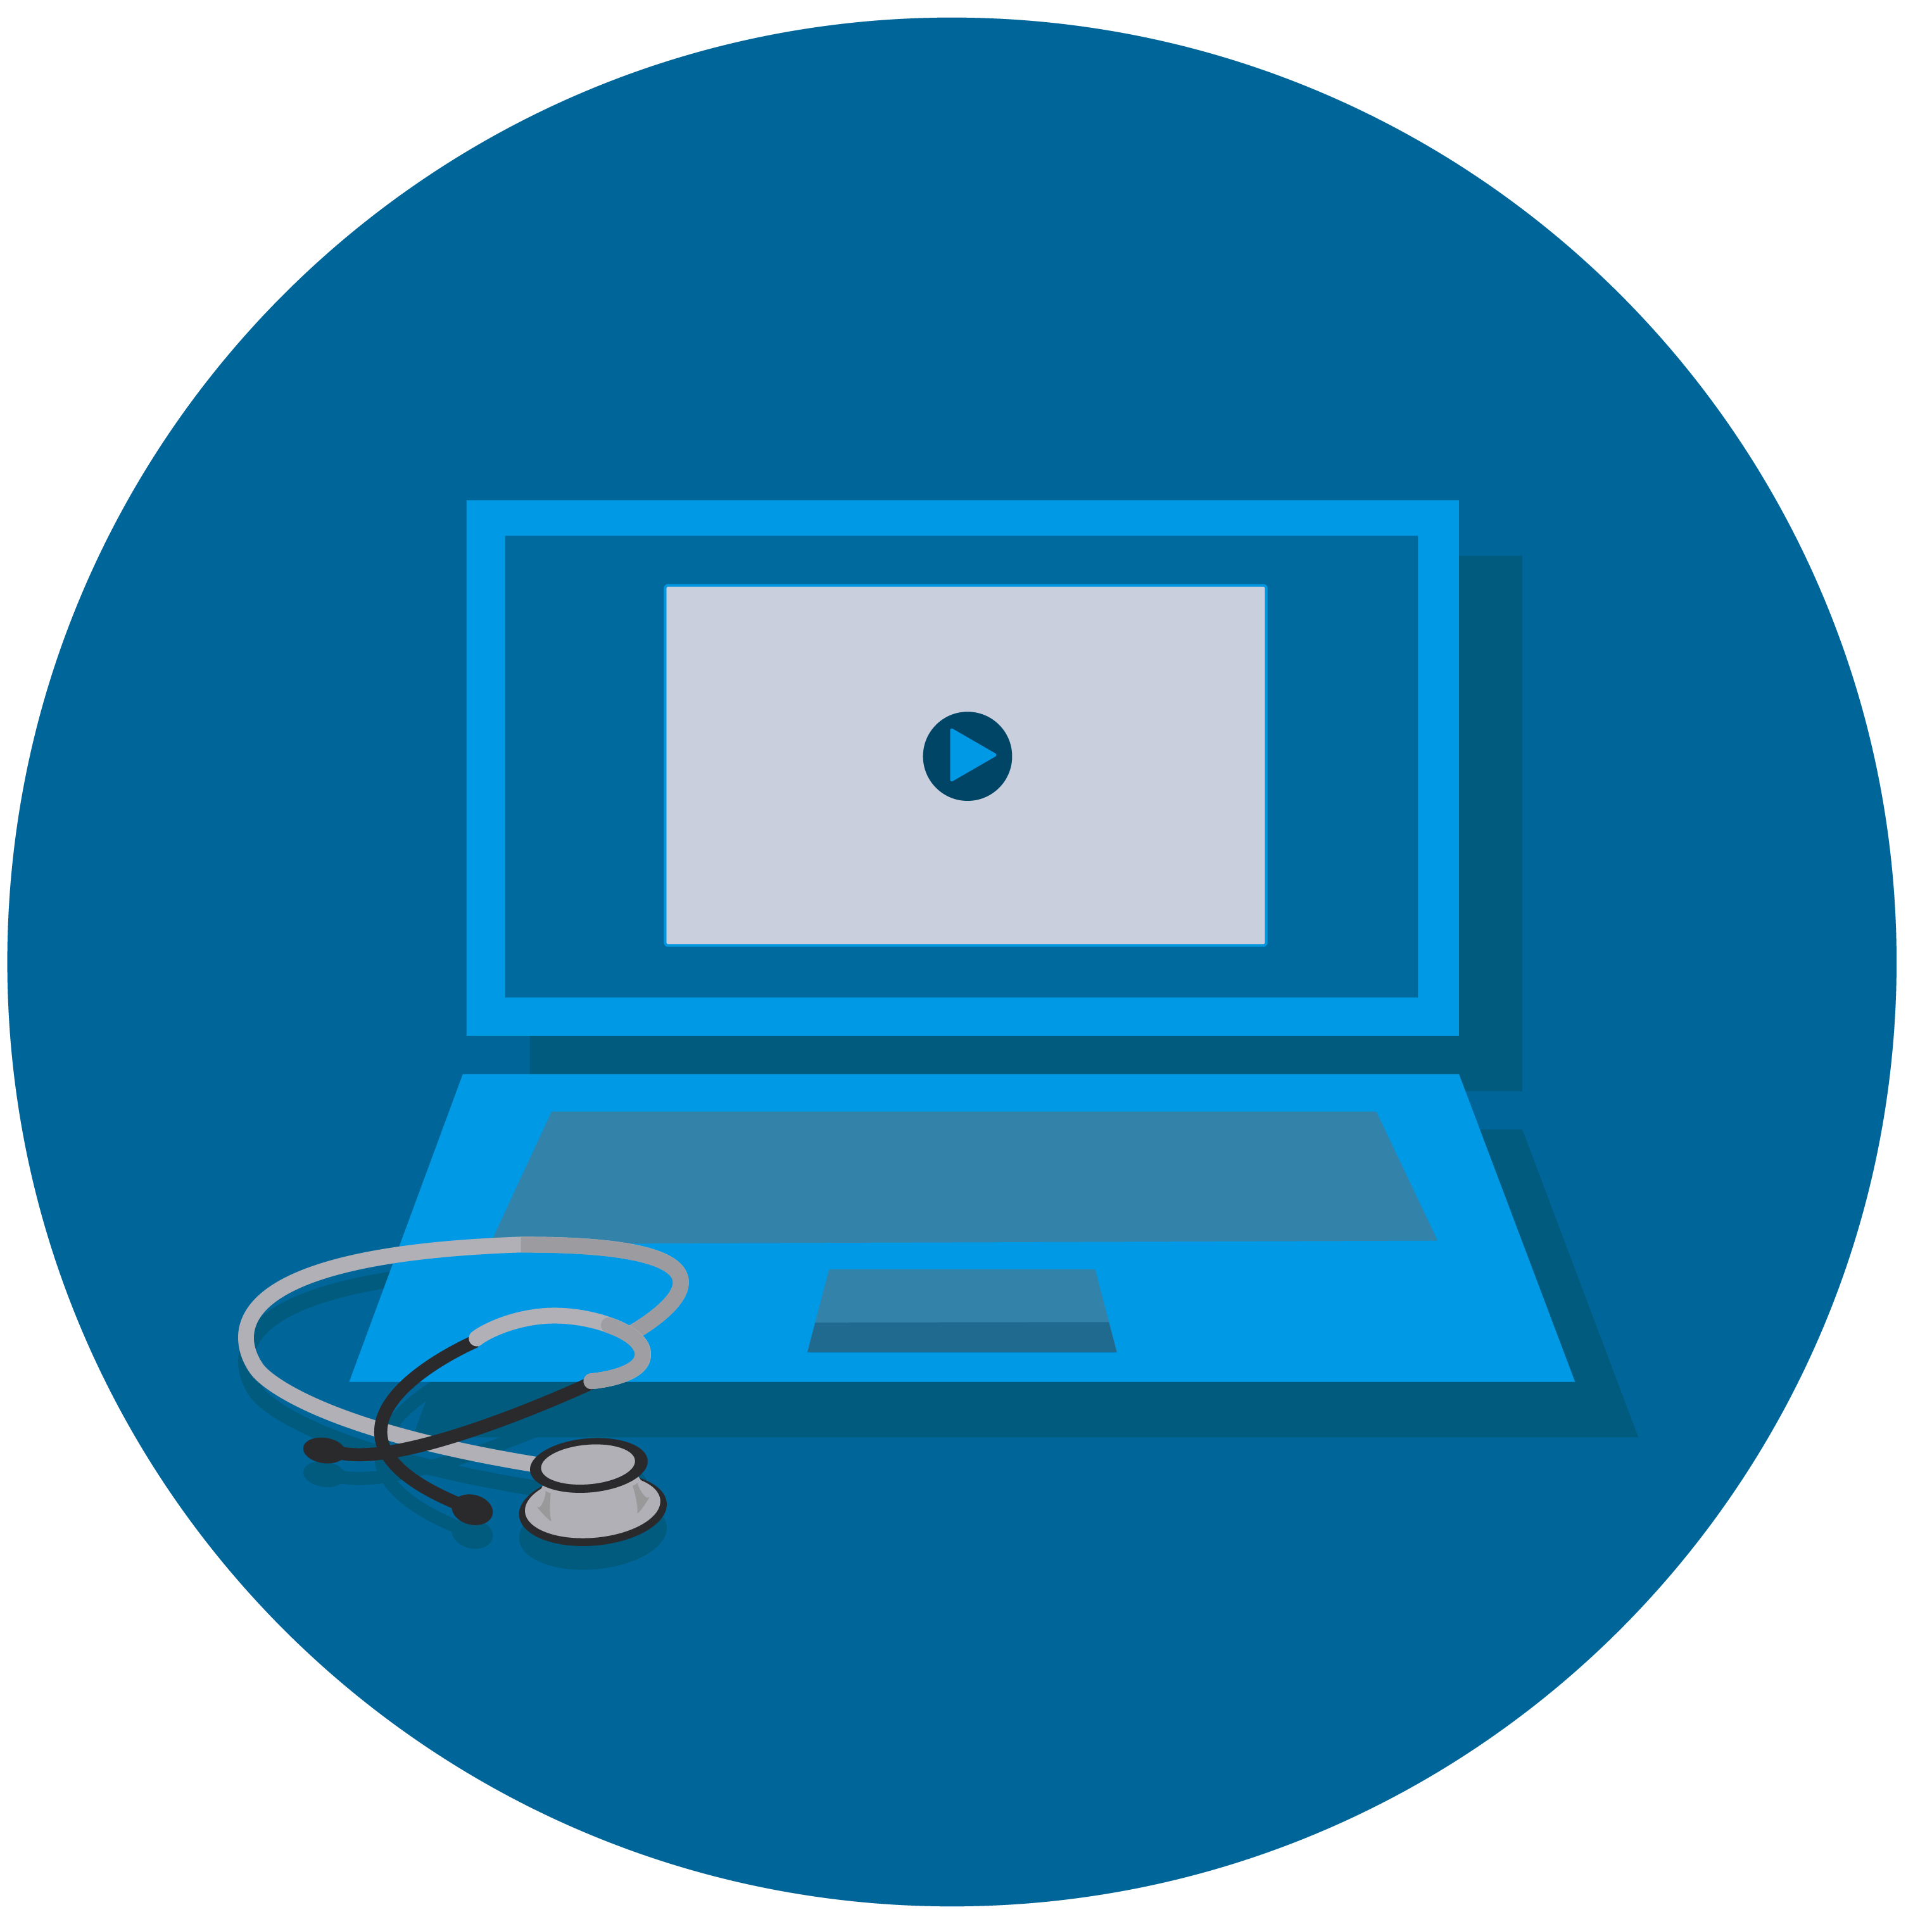 Image of a computer and stethoscope